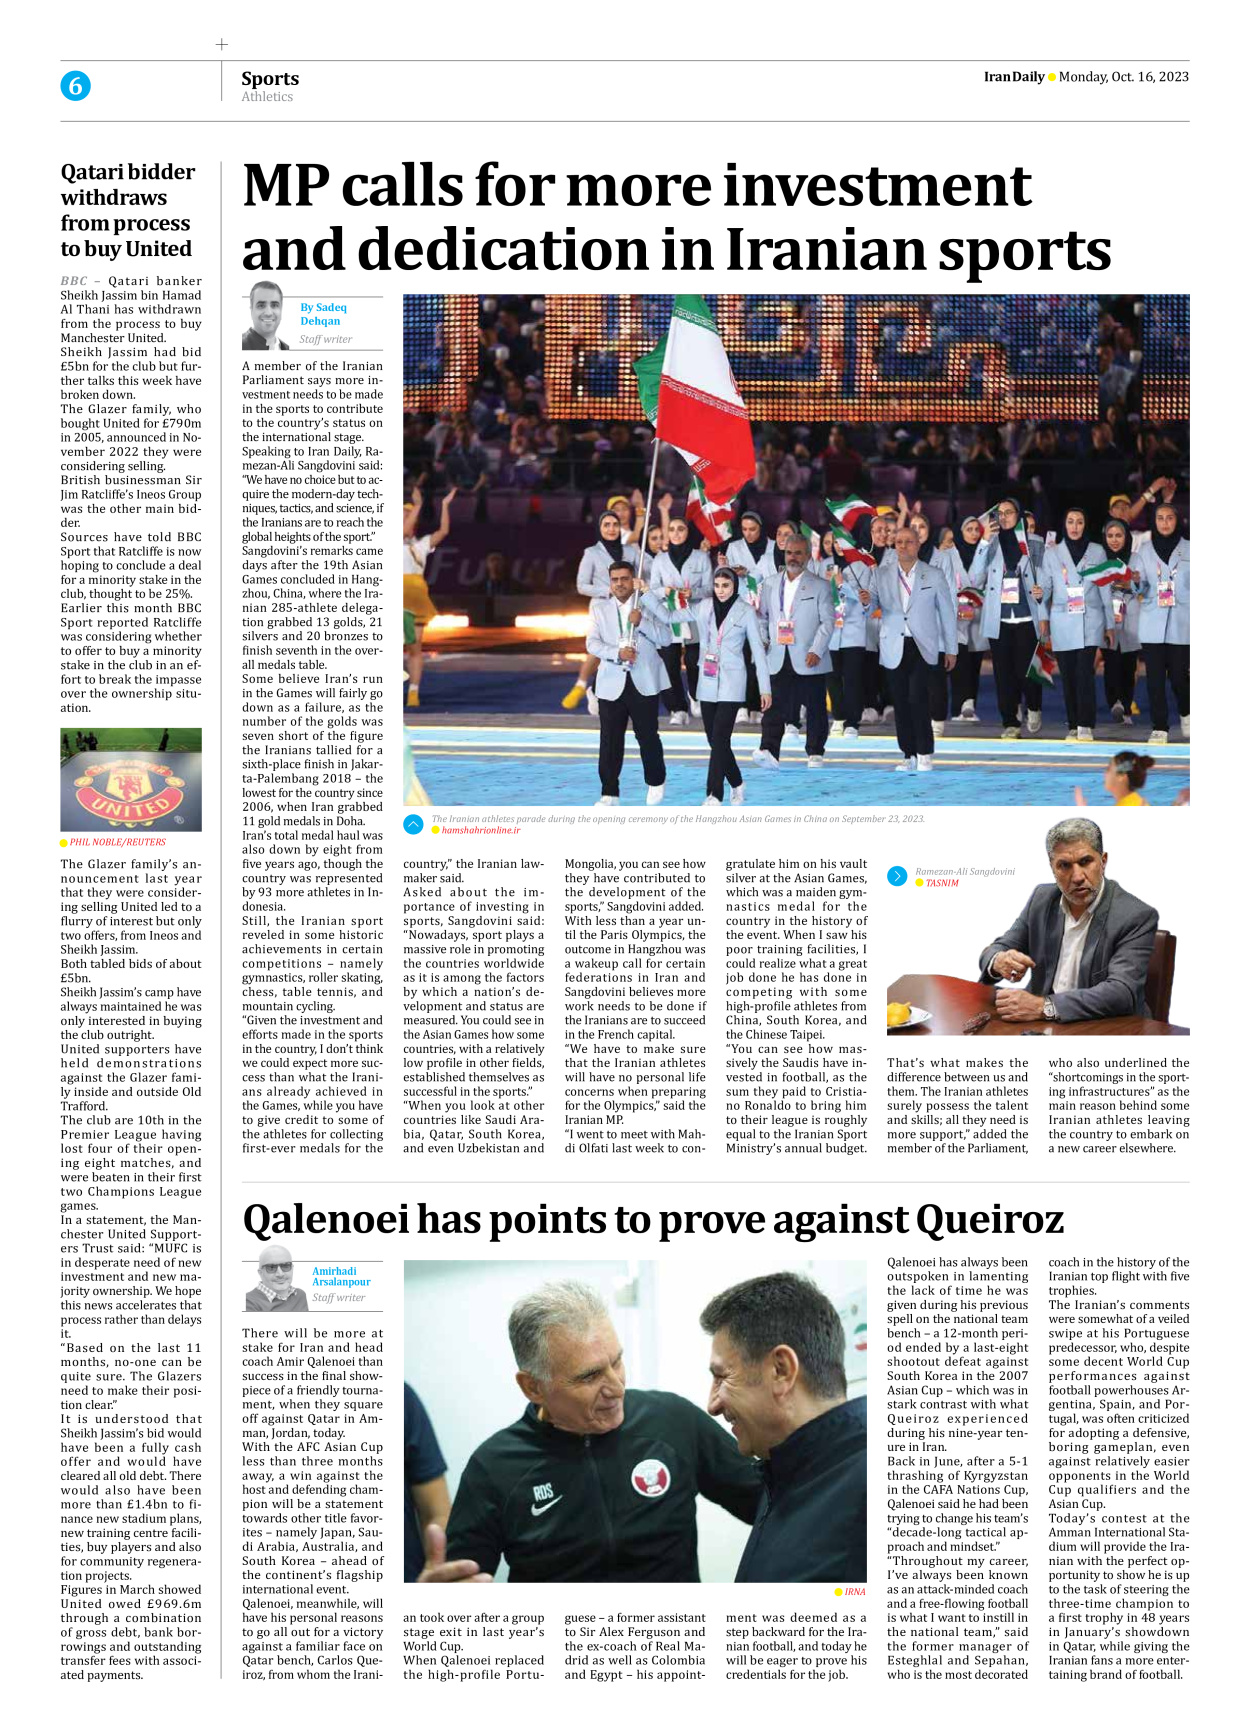 Iran Daily - Number Seven Thousand Four Hundred and Nine - 16 October 2023 - Page 6